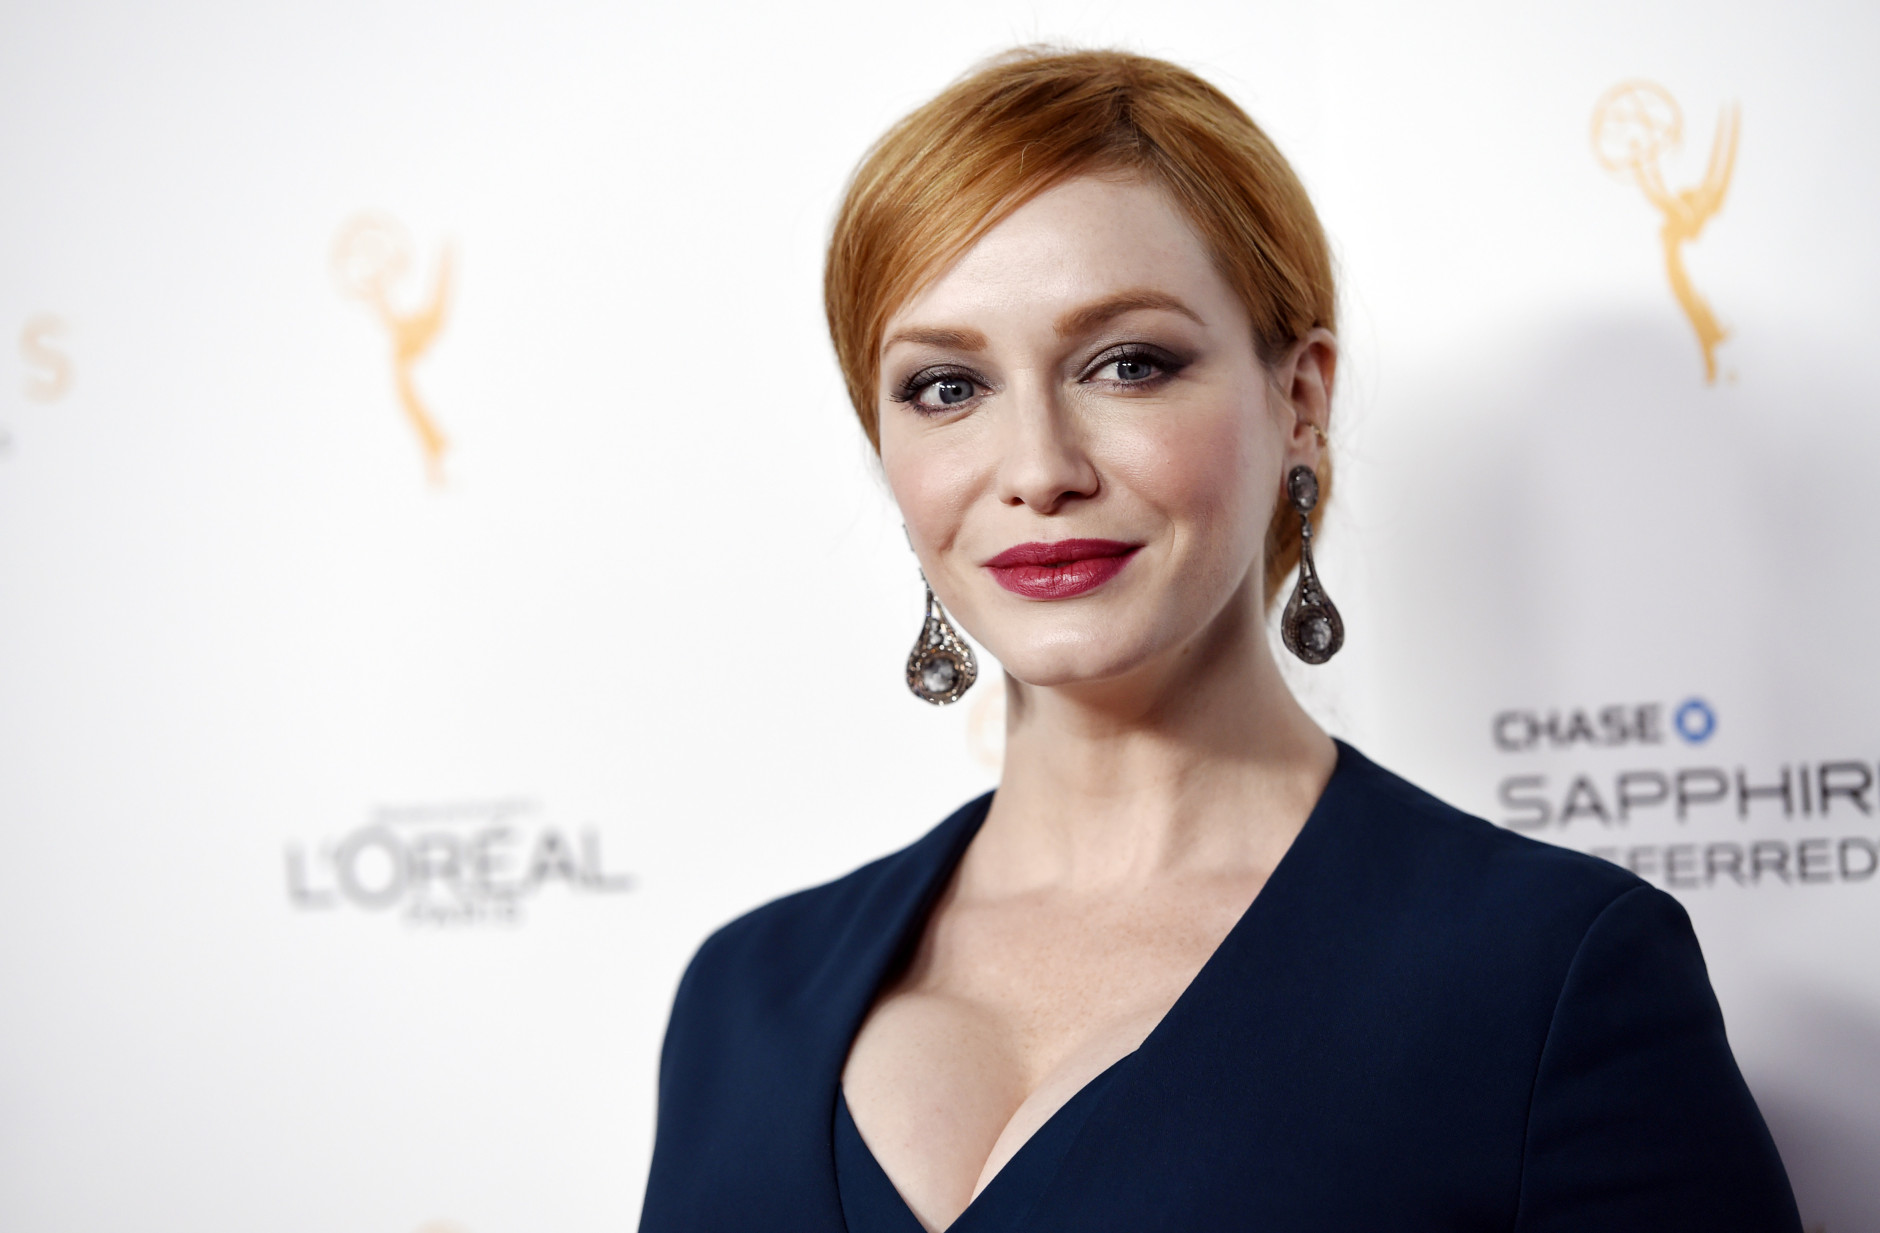 Christina Hendricks, an Emmy nominee for Outstanding Supporting Actress in a Drama Series for "Mad Men," poses at the 67th Emmy Awards Performers Nominee Reception at the Pacific Design Center on Saturday, Sept. 19, 2015, in West Hollywood, Calif. (Photo by Chris Pizzello/Invision/AP)